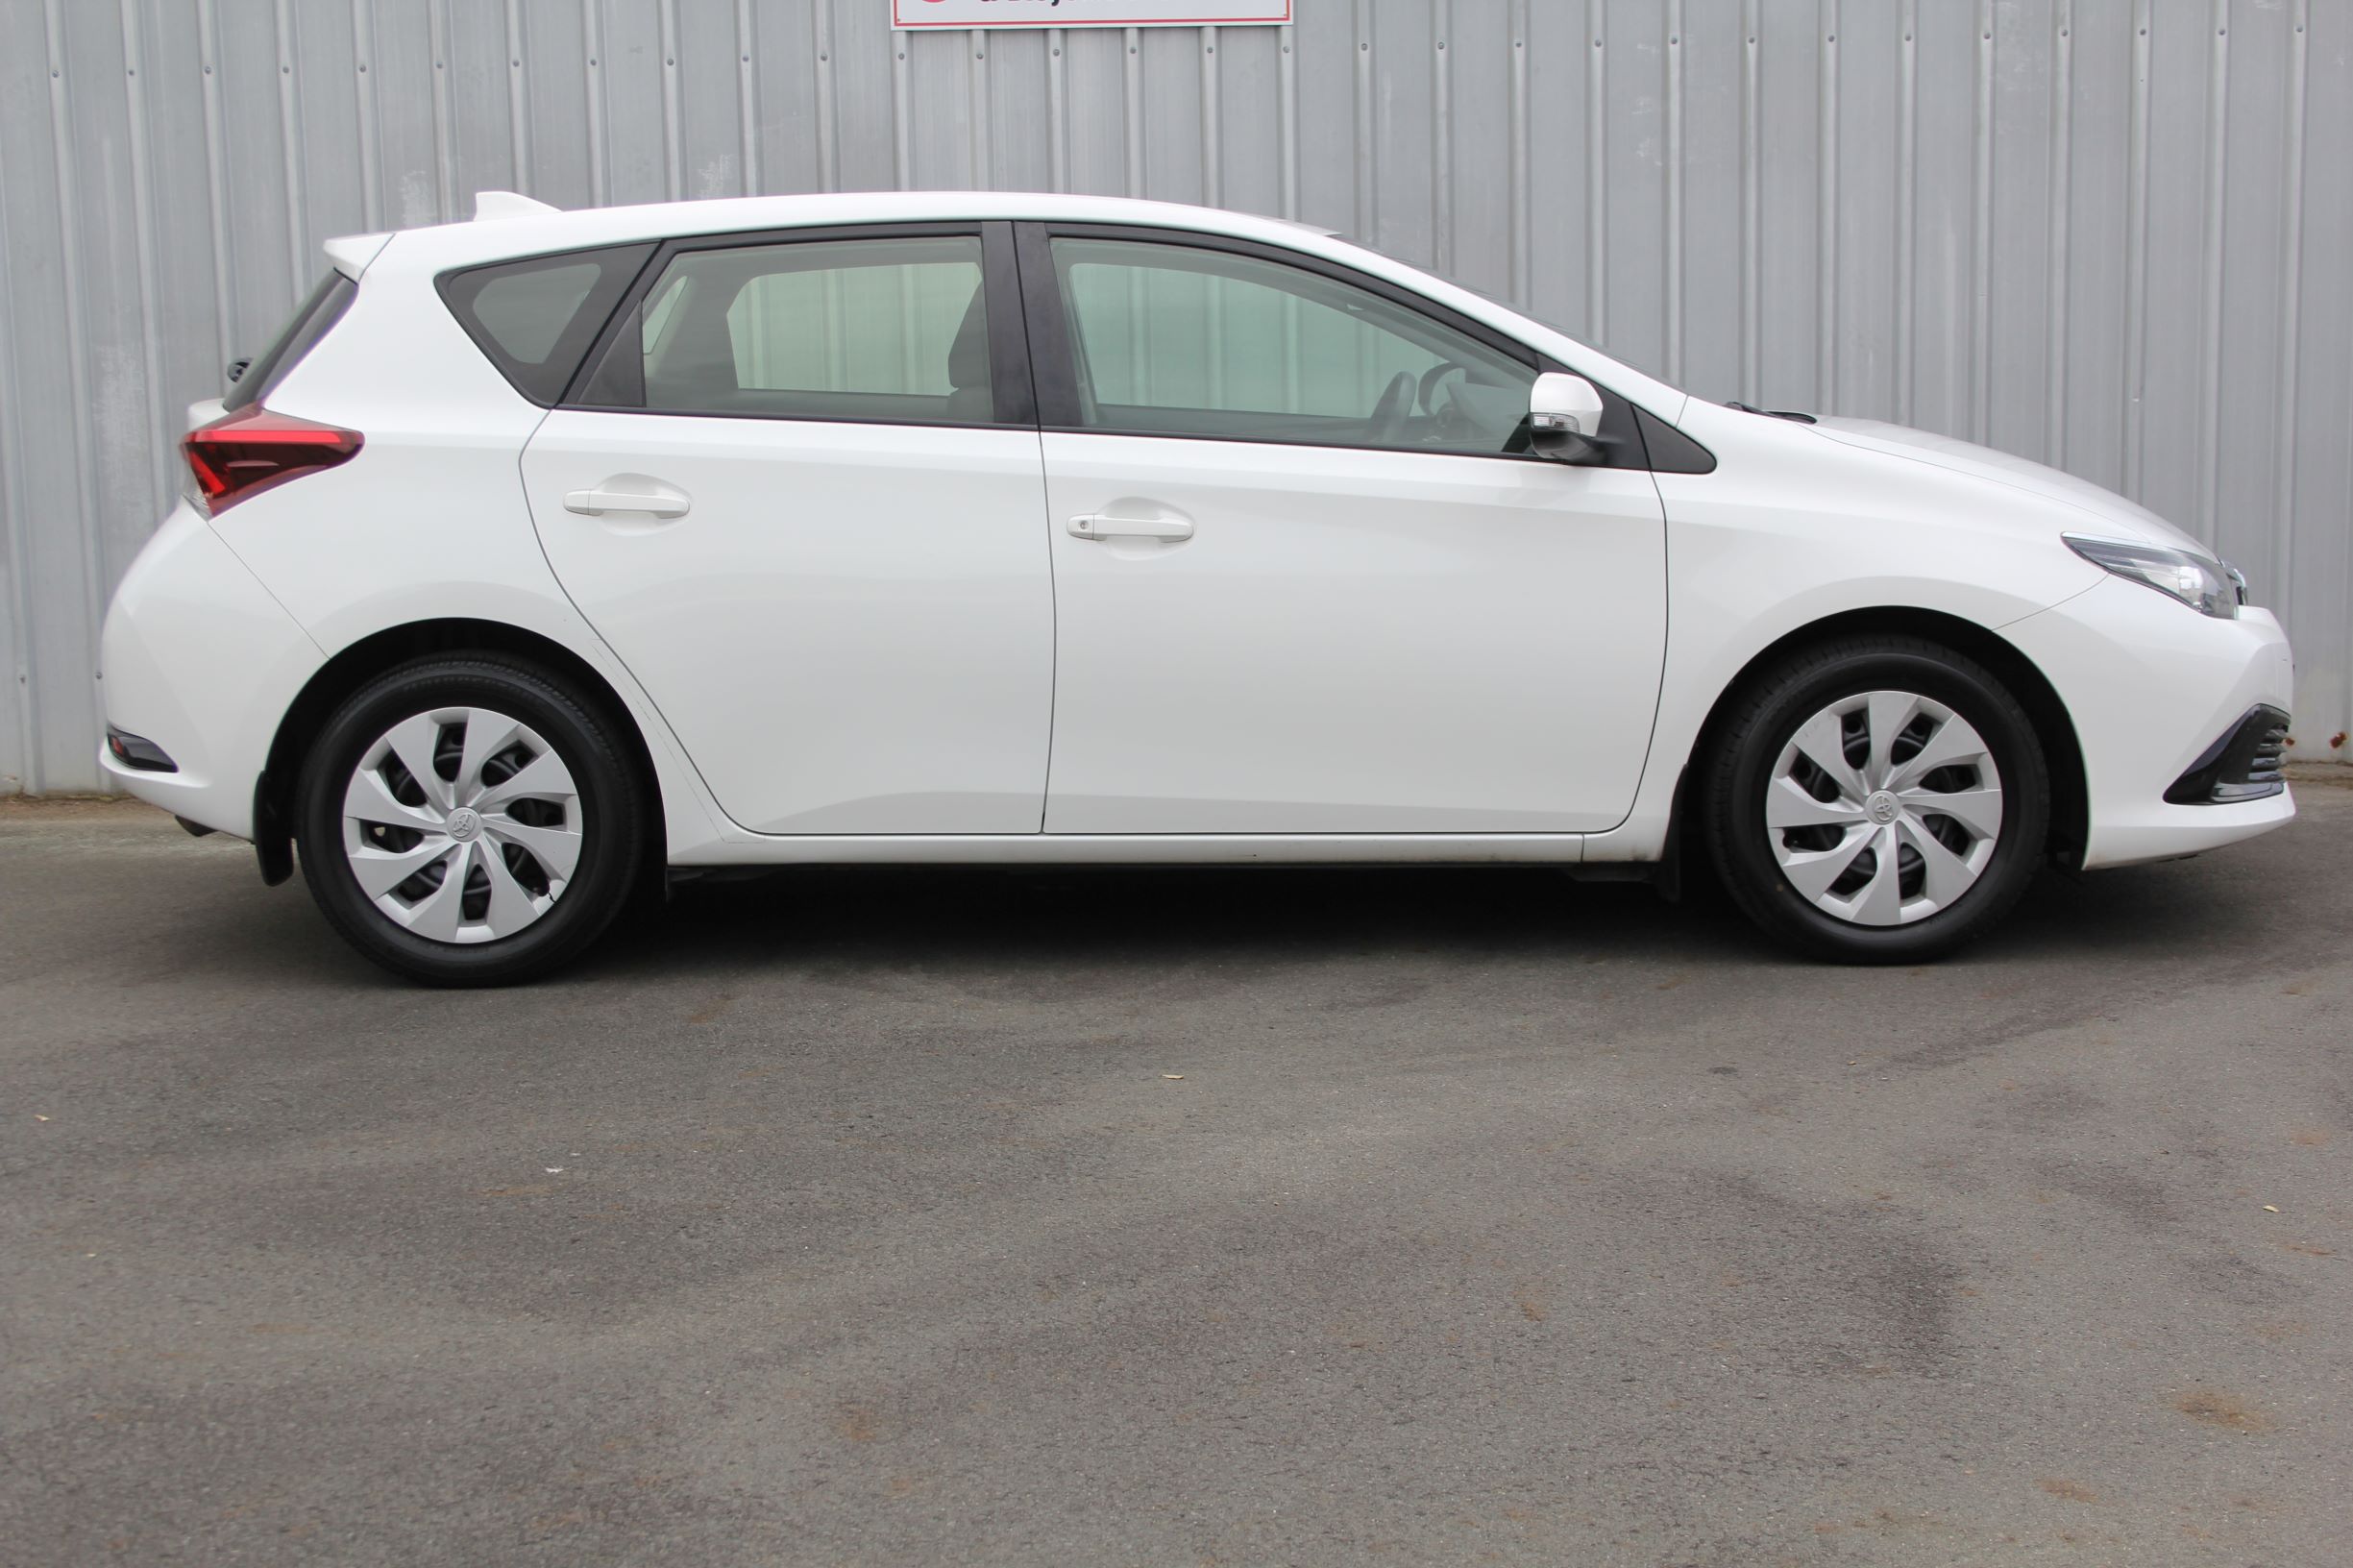 Toyota Corolla 2017 for sale in Auckland